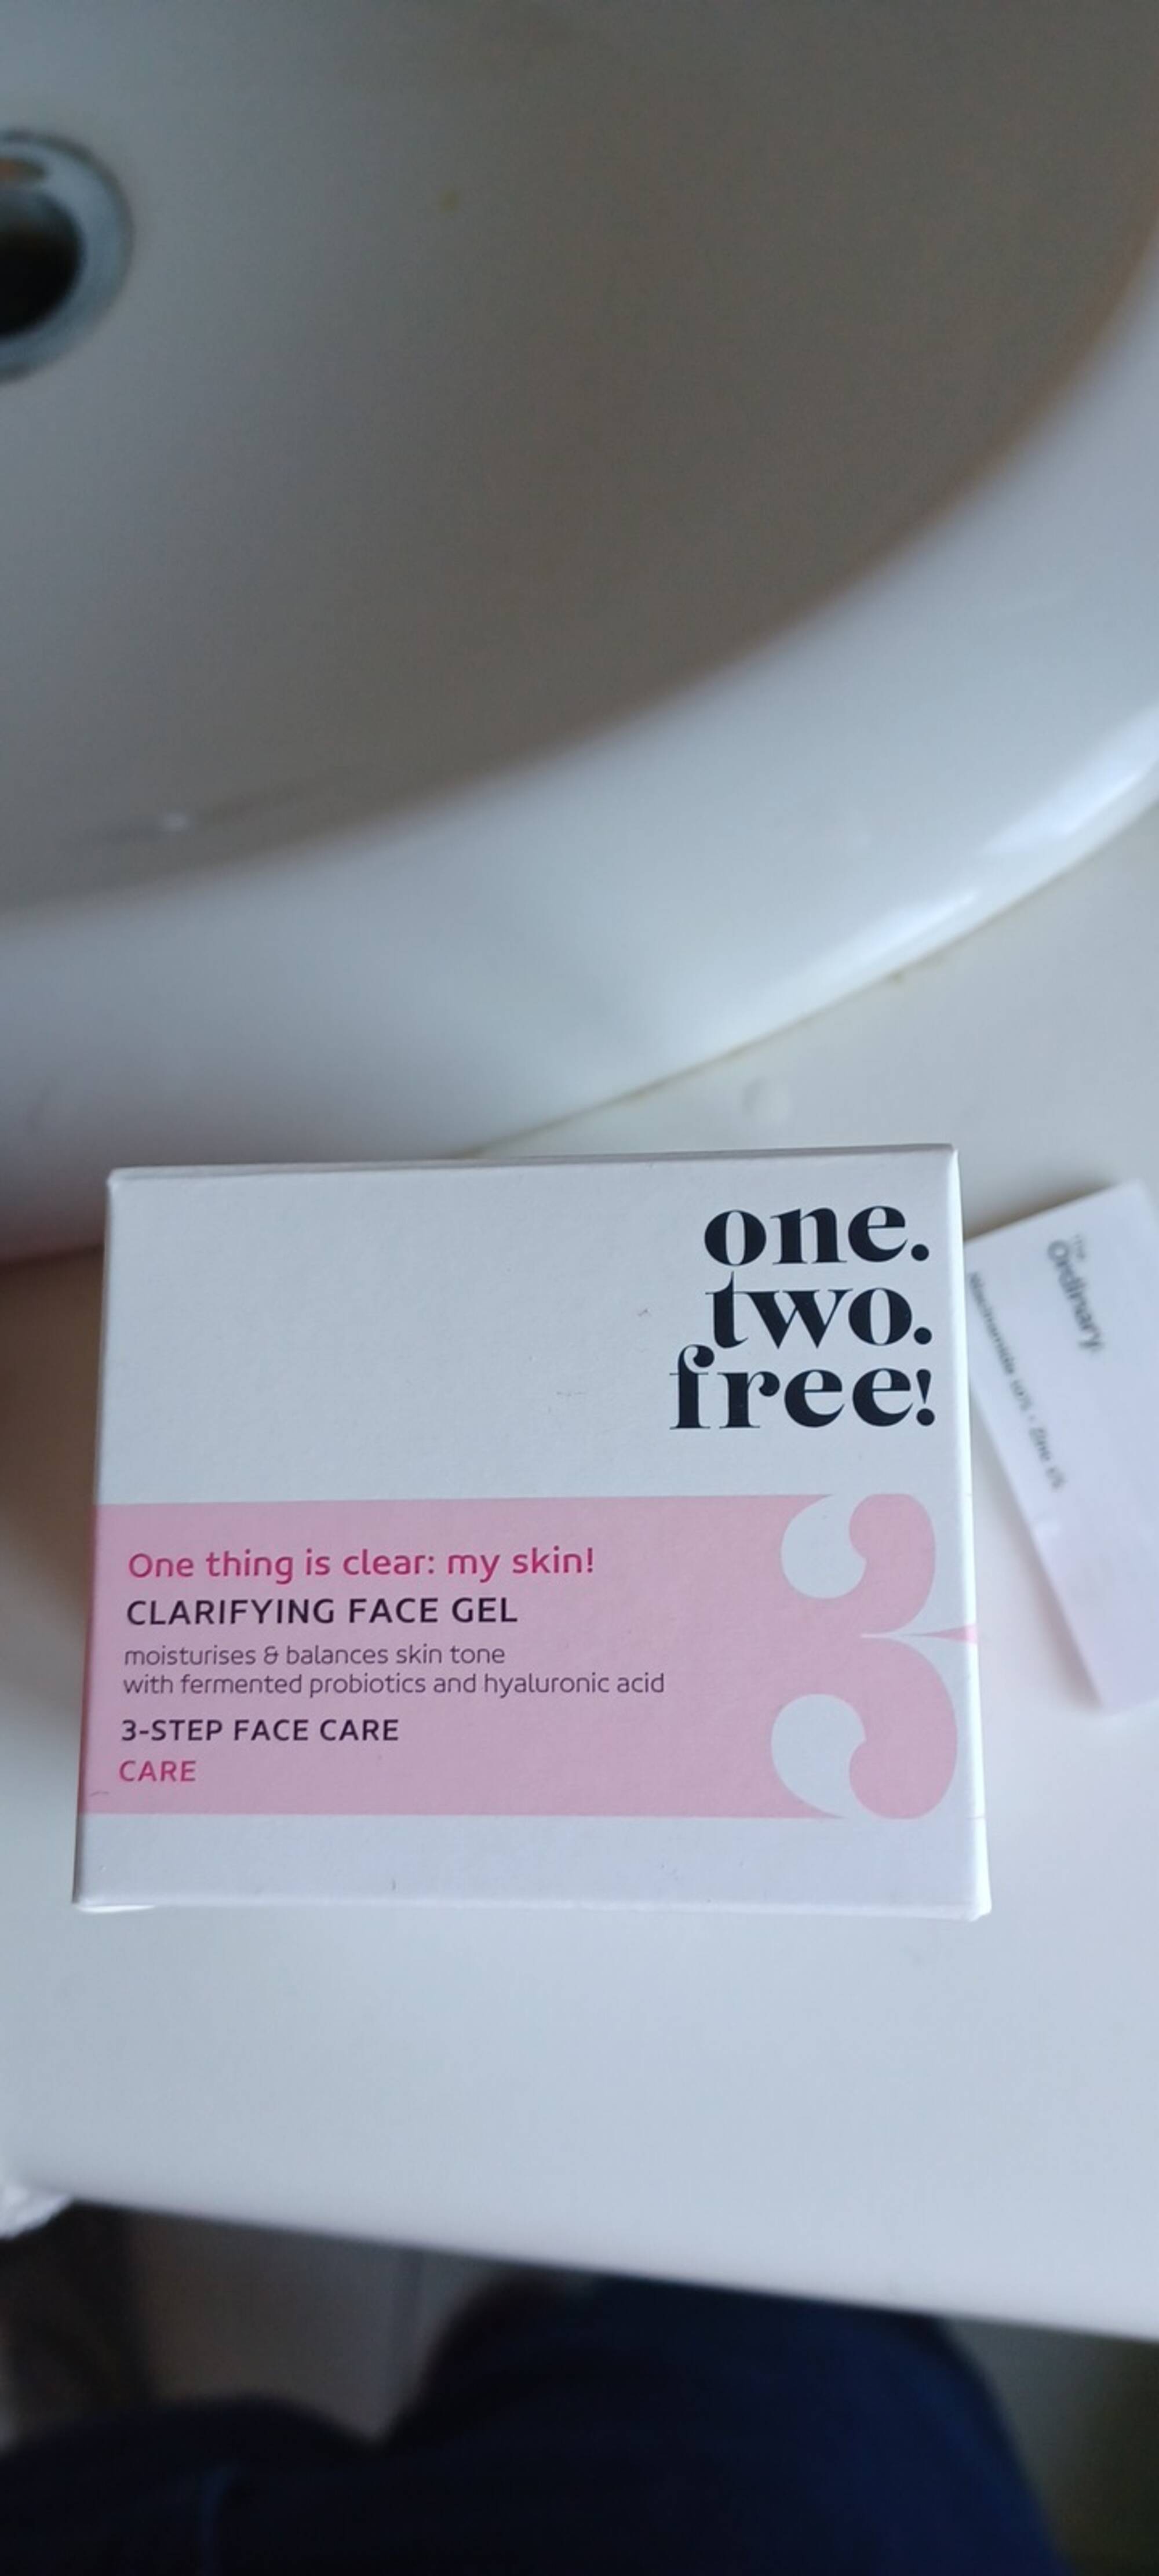 ONE.TWO.FREE! - Clarifying face gel 